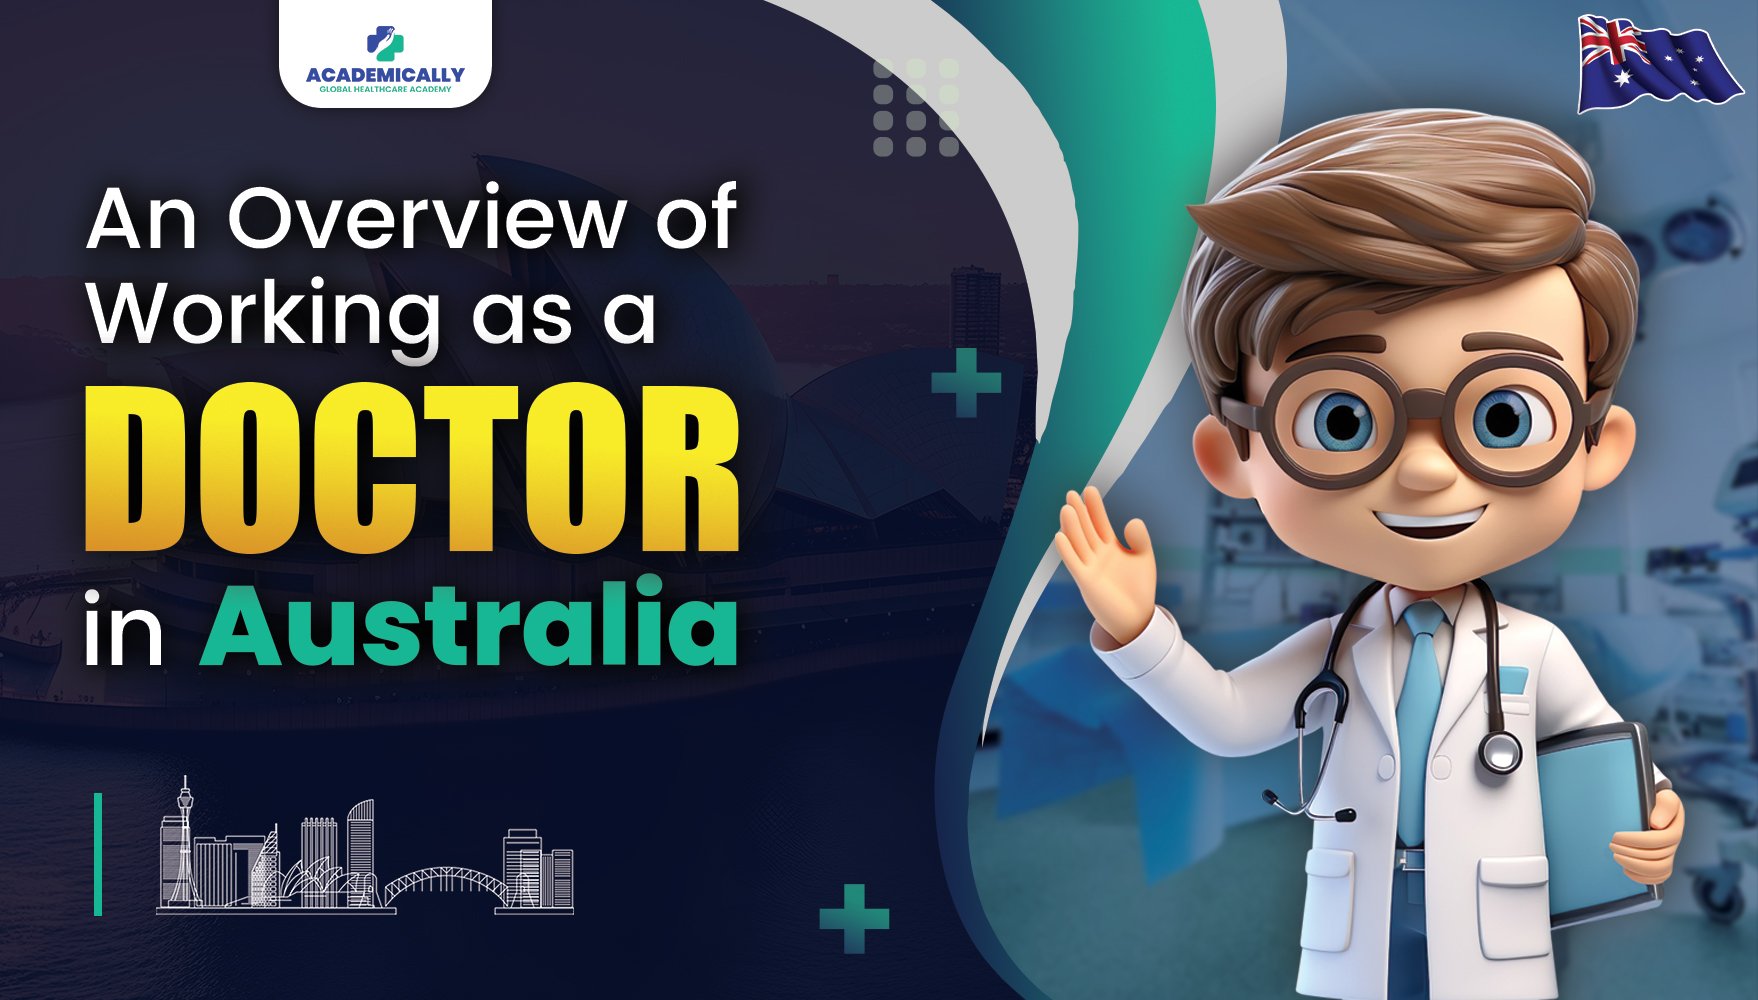 Working as a Doctor in Australia